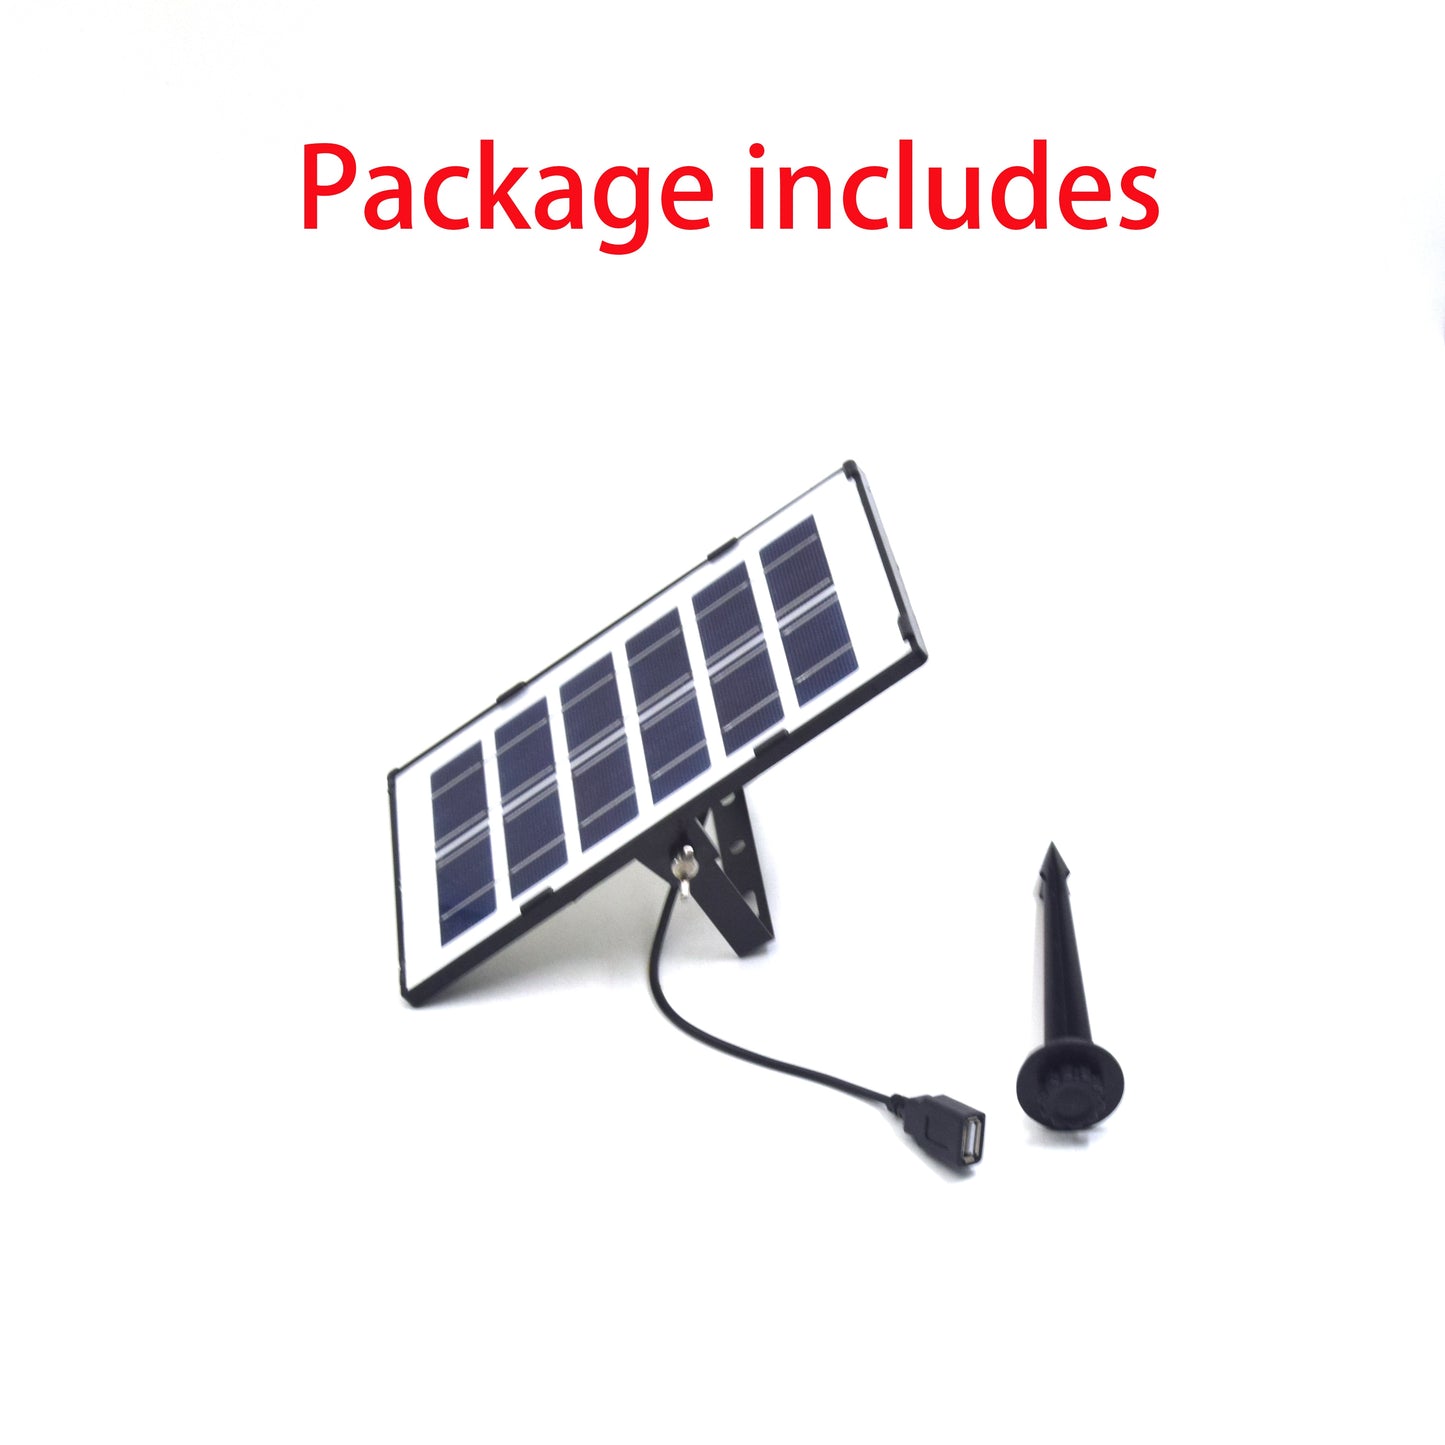 USB Solar Panel 2/4/6W 6V DIY Solar Charger 214x129mm for 3-5V Battery/Mobile Phone Charging Accessories